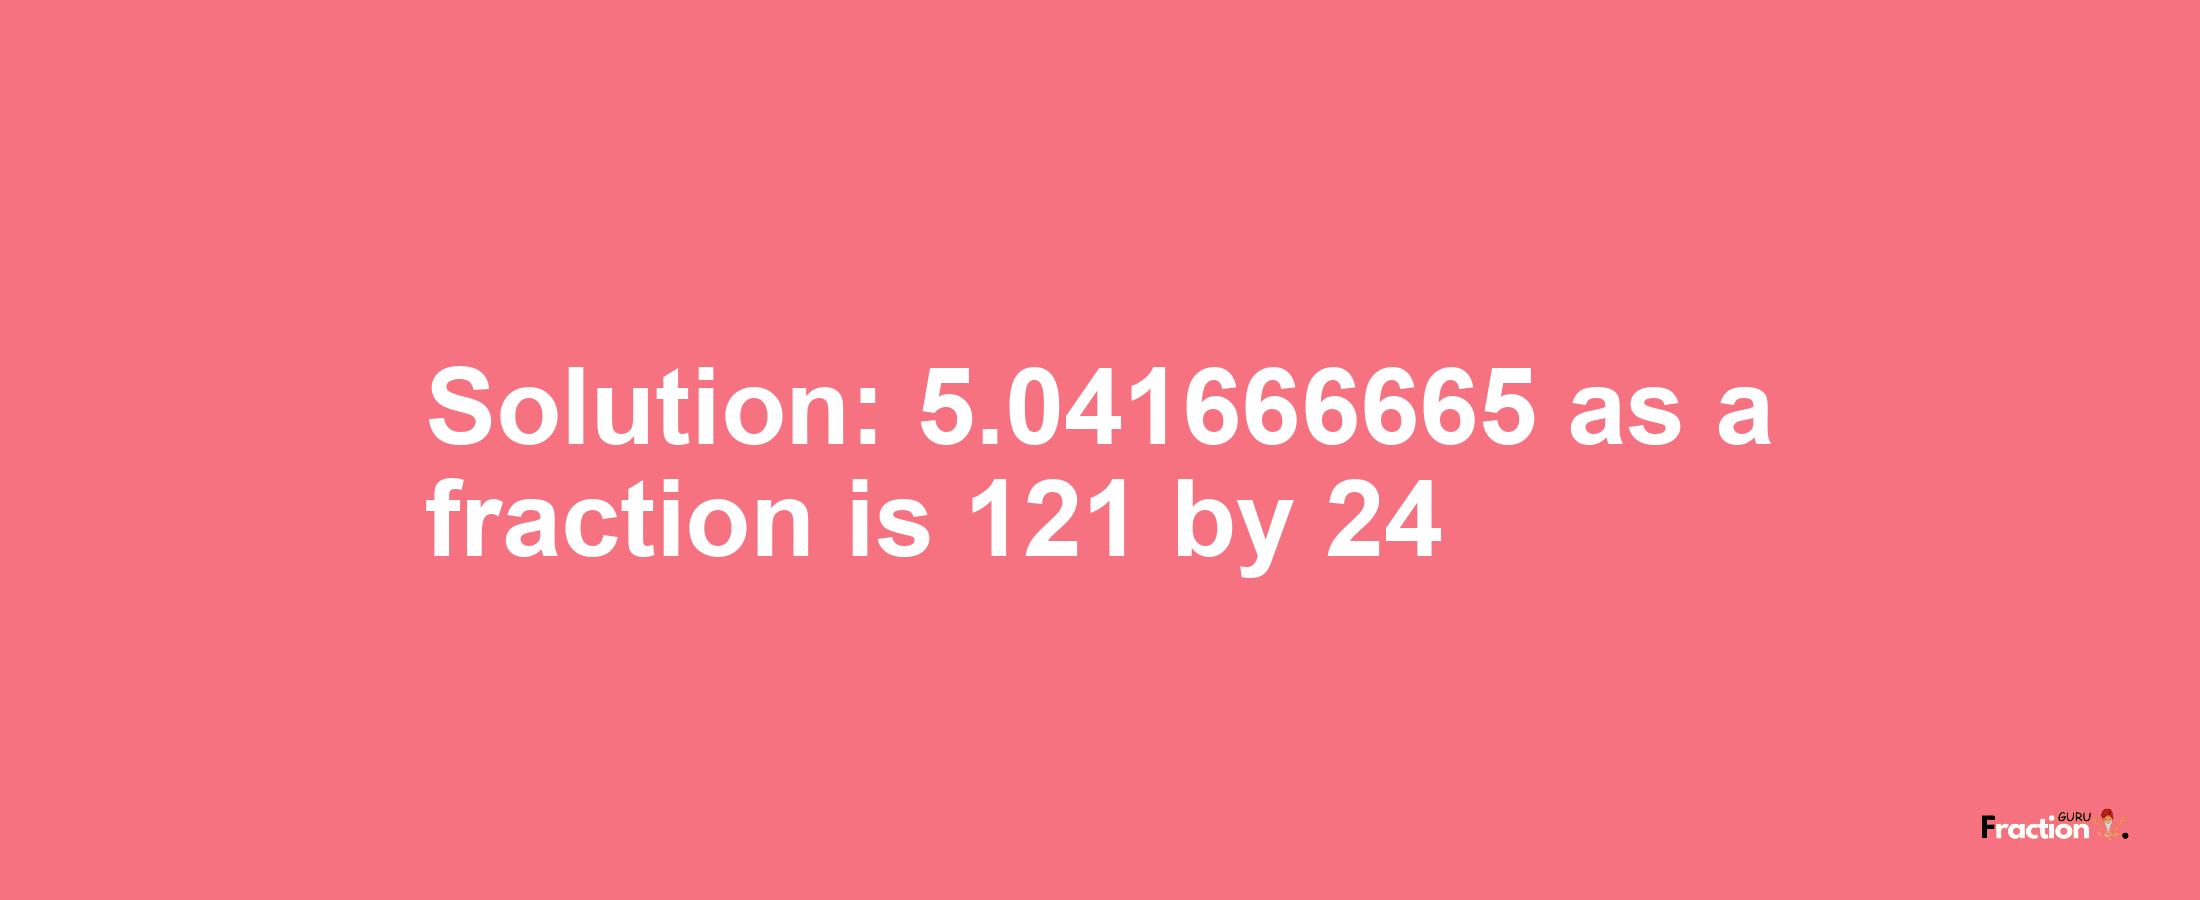 Solution:5.041666665 as a fraction is 121/24